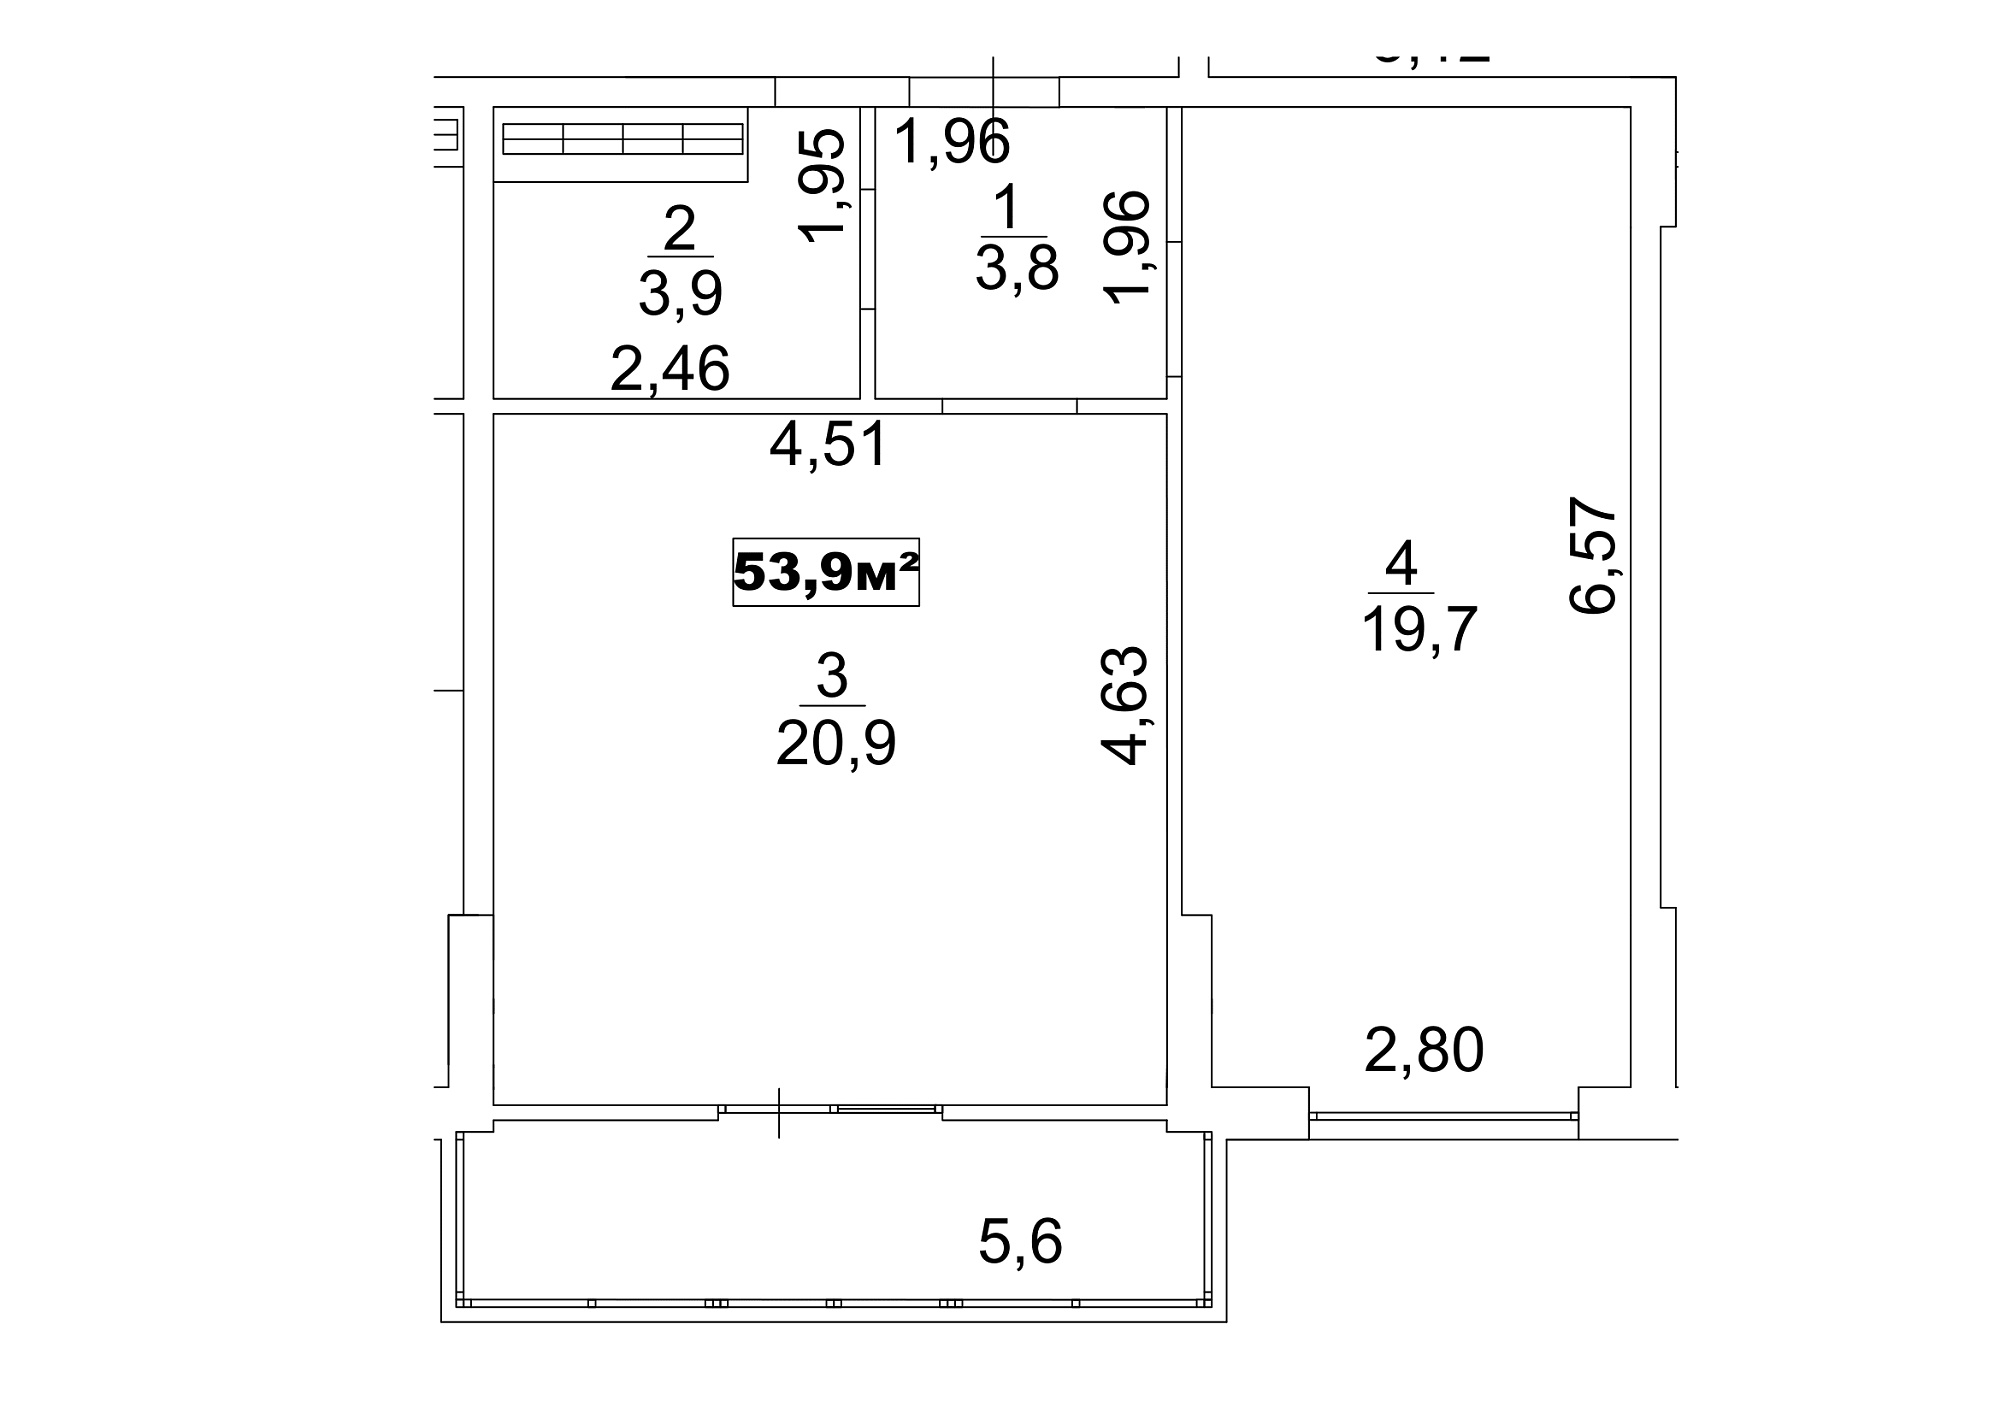 Planning 1-rm flats area 53.9m2, AB-13-06/00050.